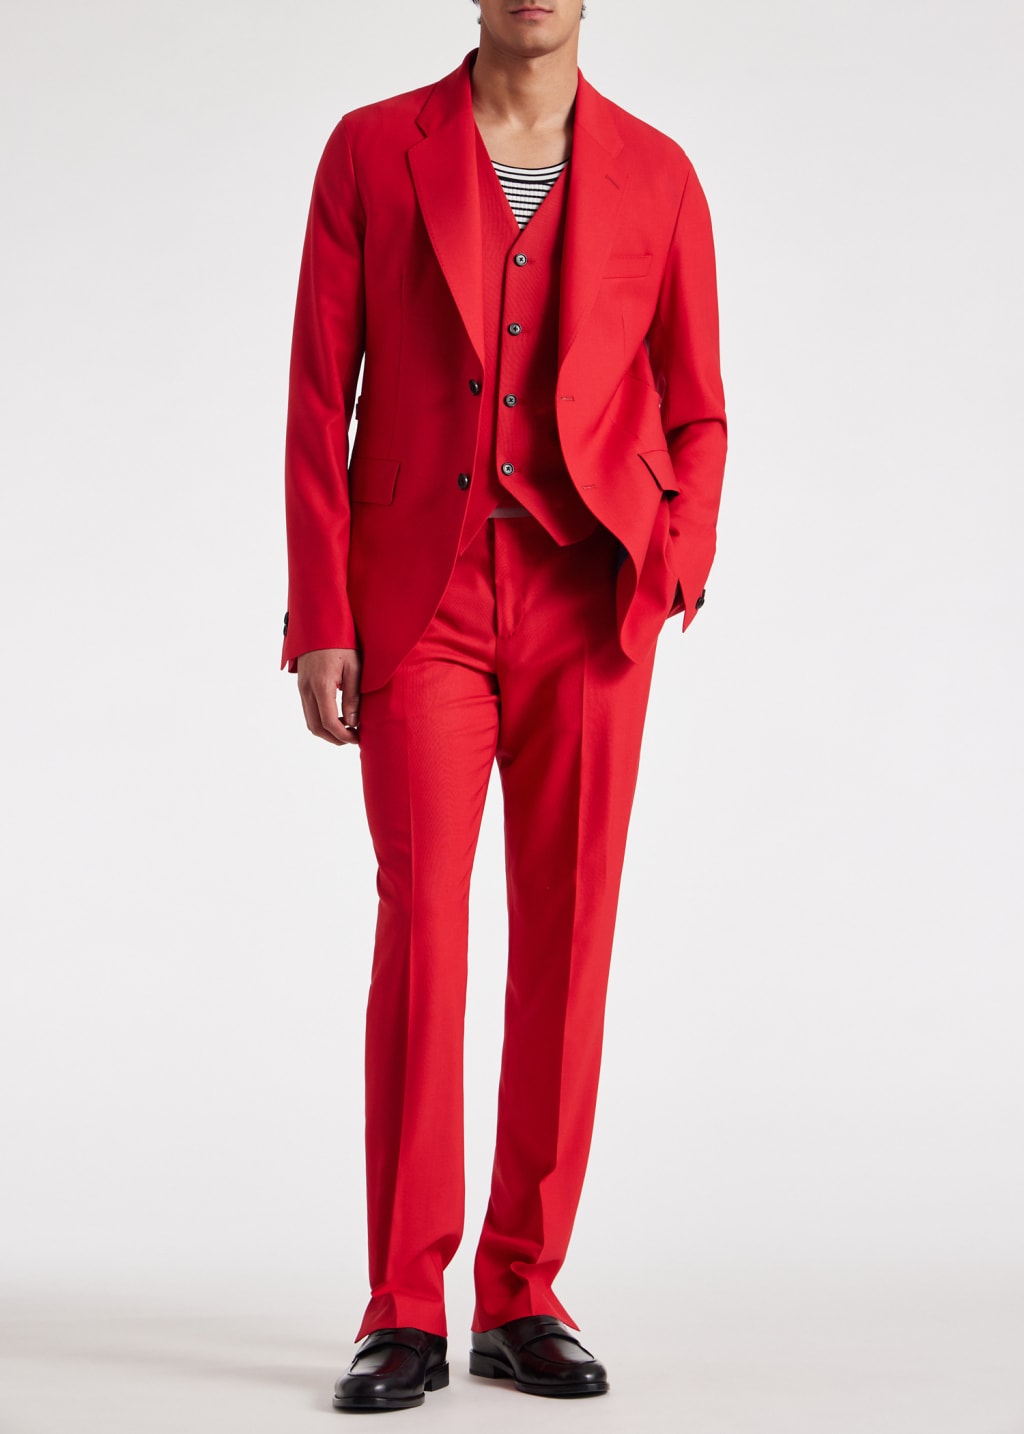 Model view - Red Fresco Wool Buggy-Lined Blazer